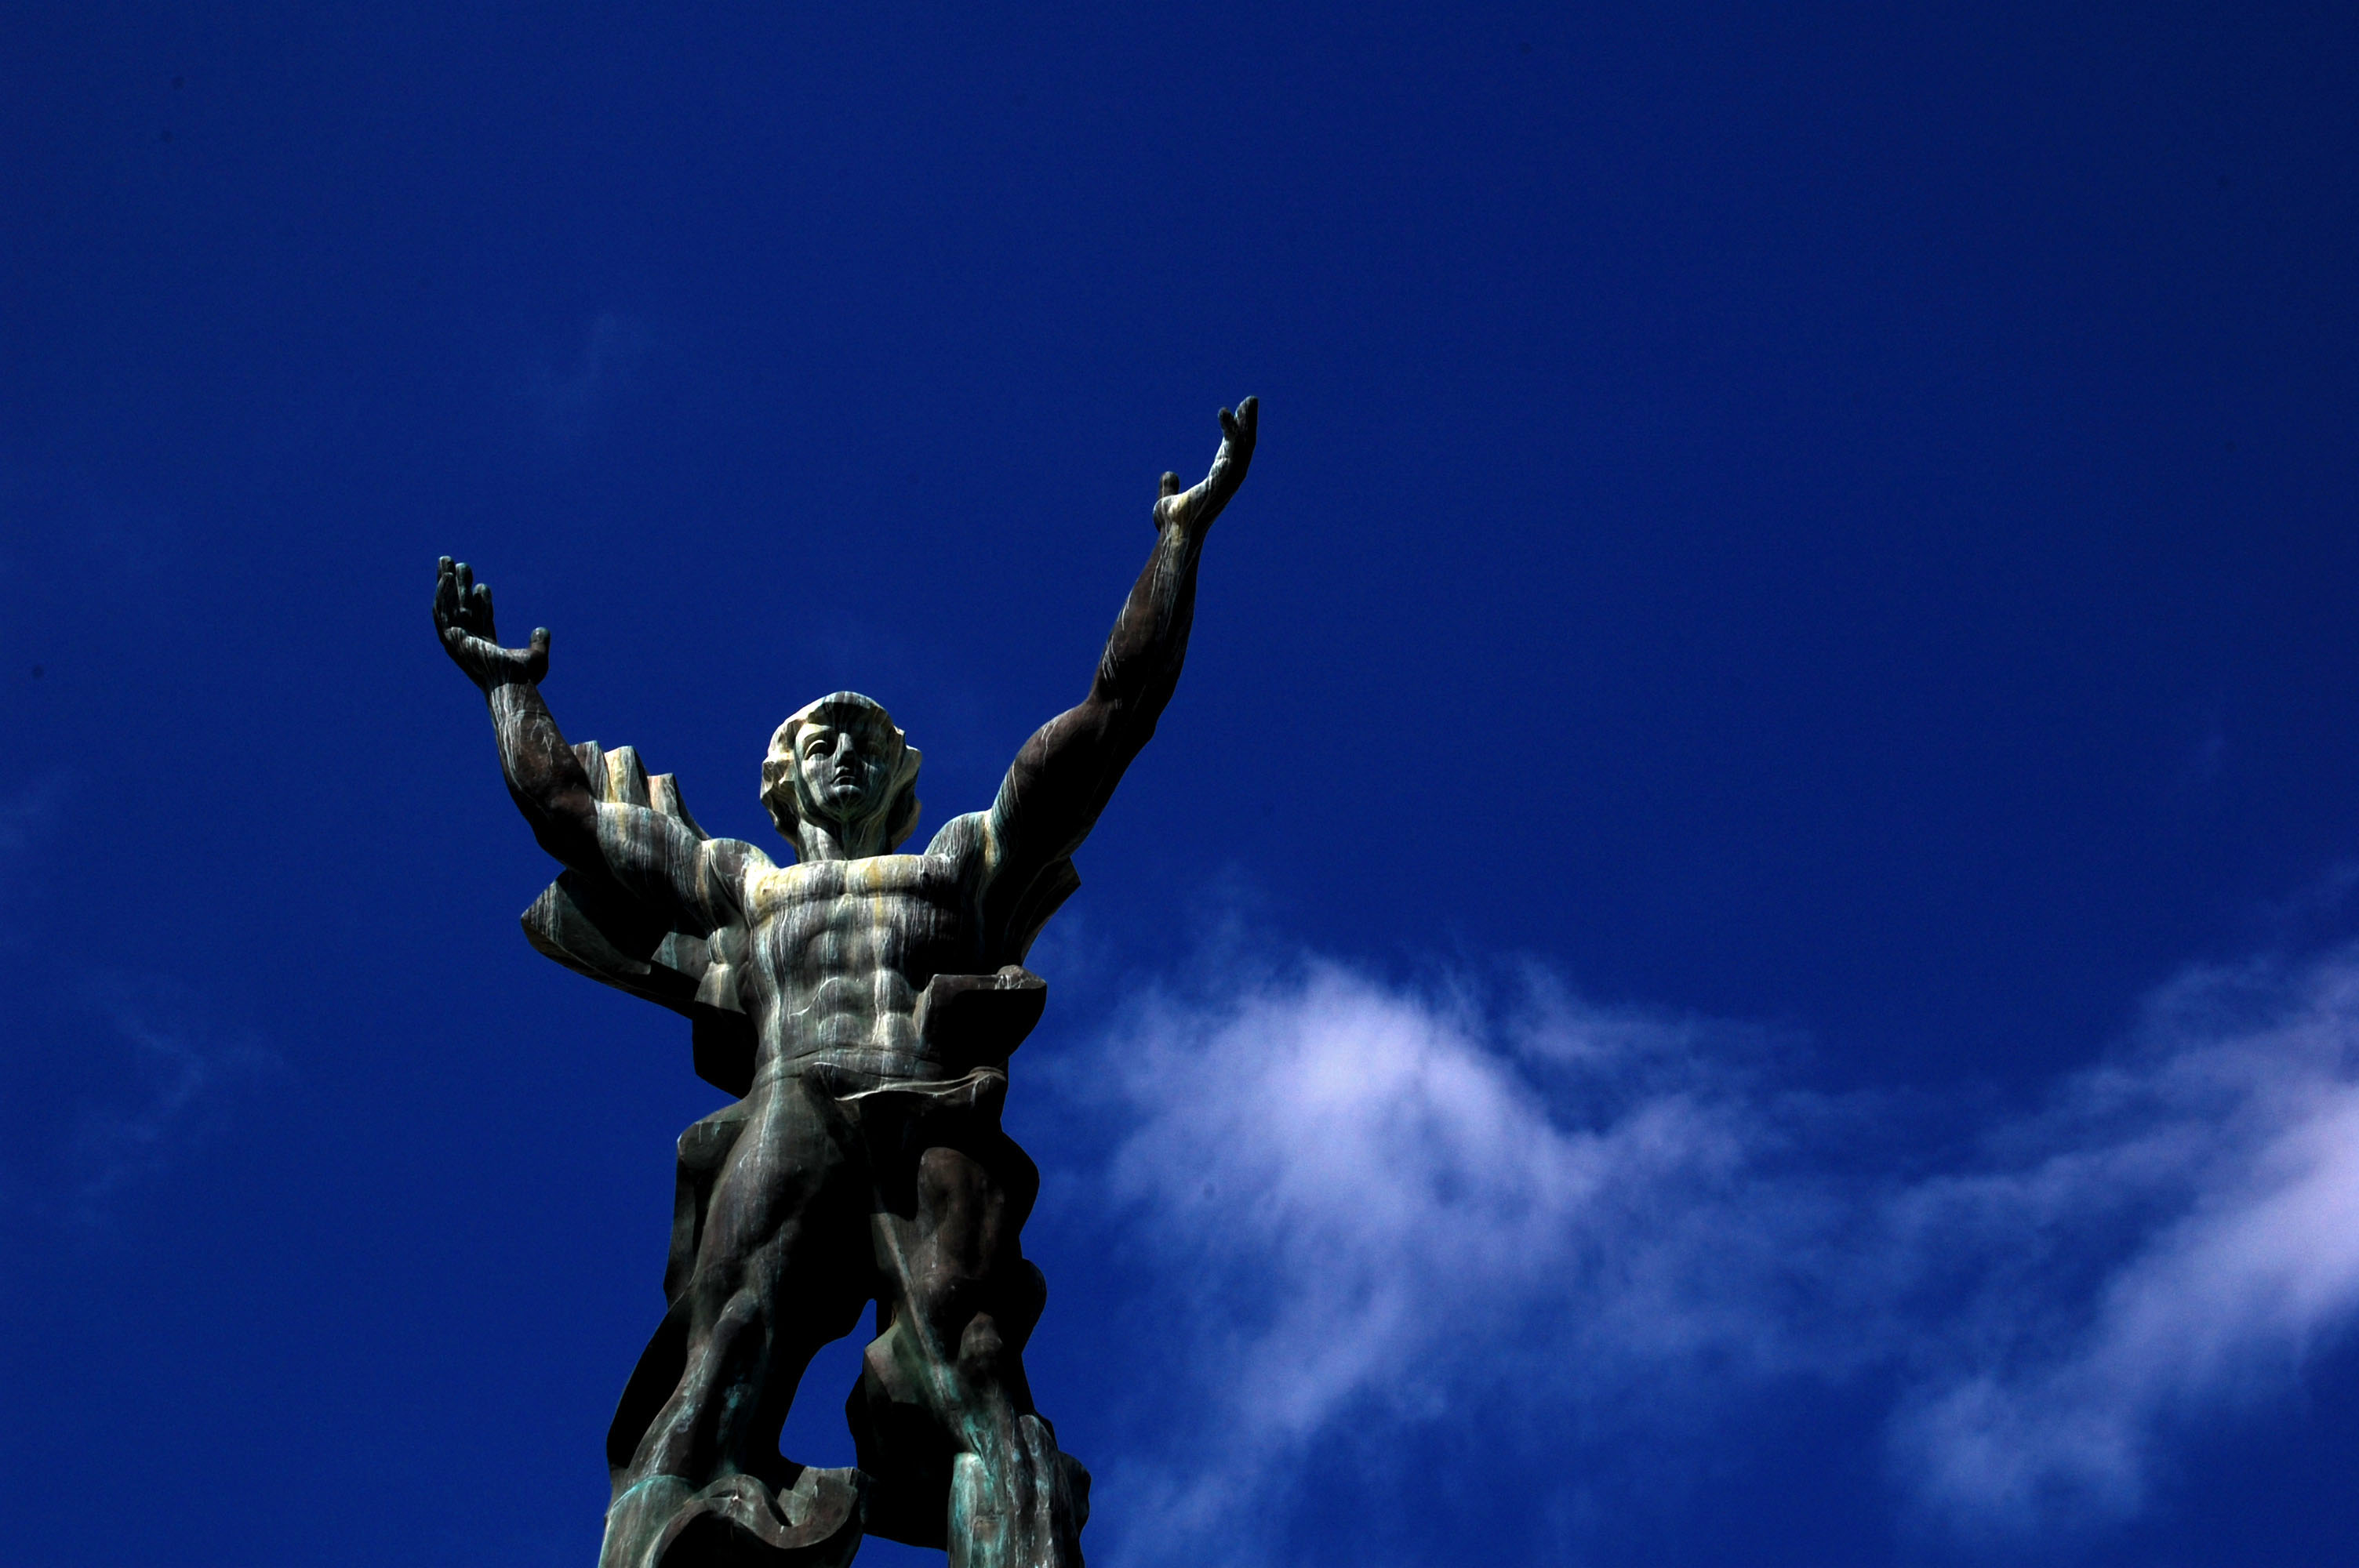 Statue in Puerto Banus with blue sky in the background